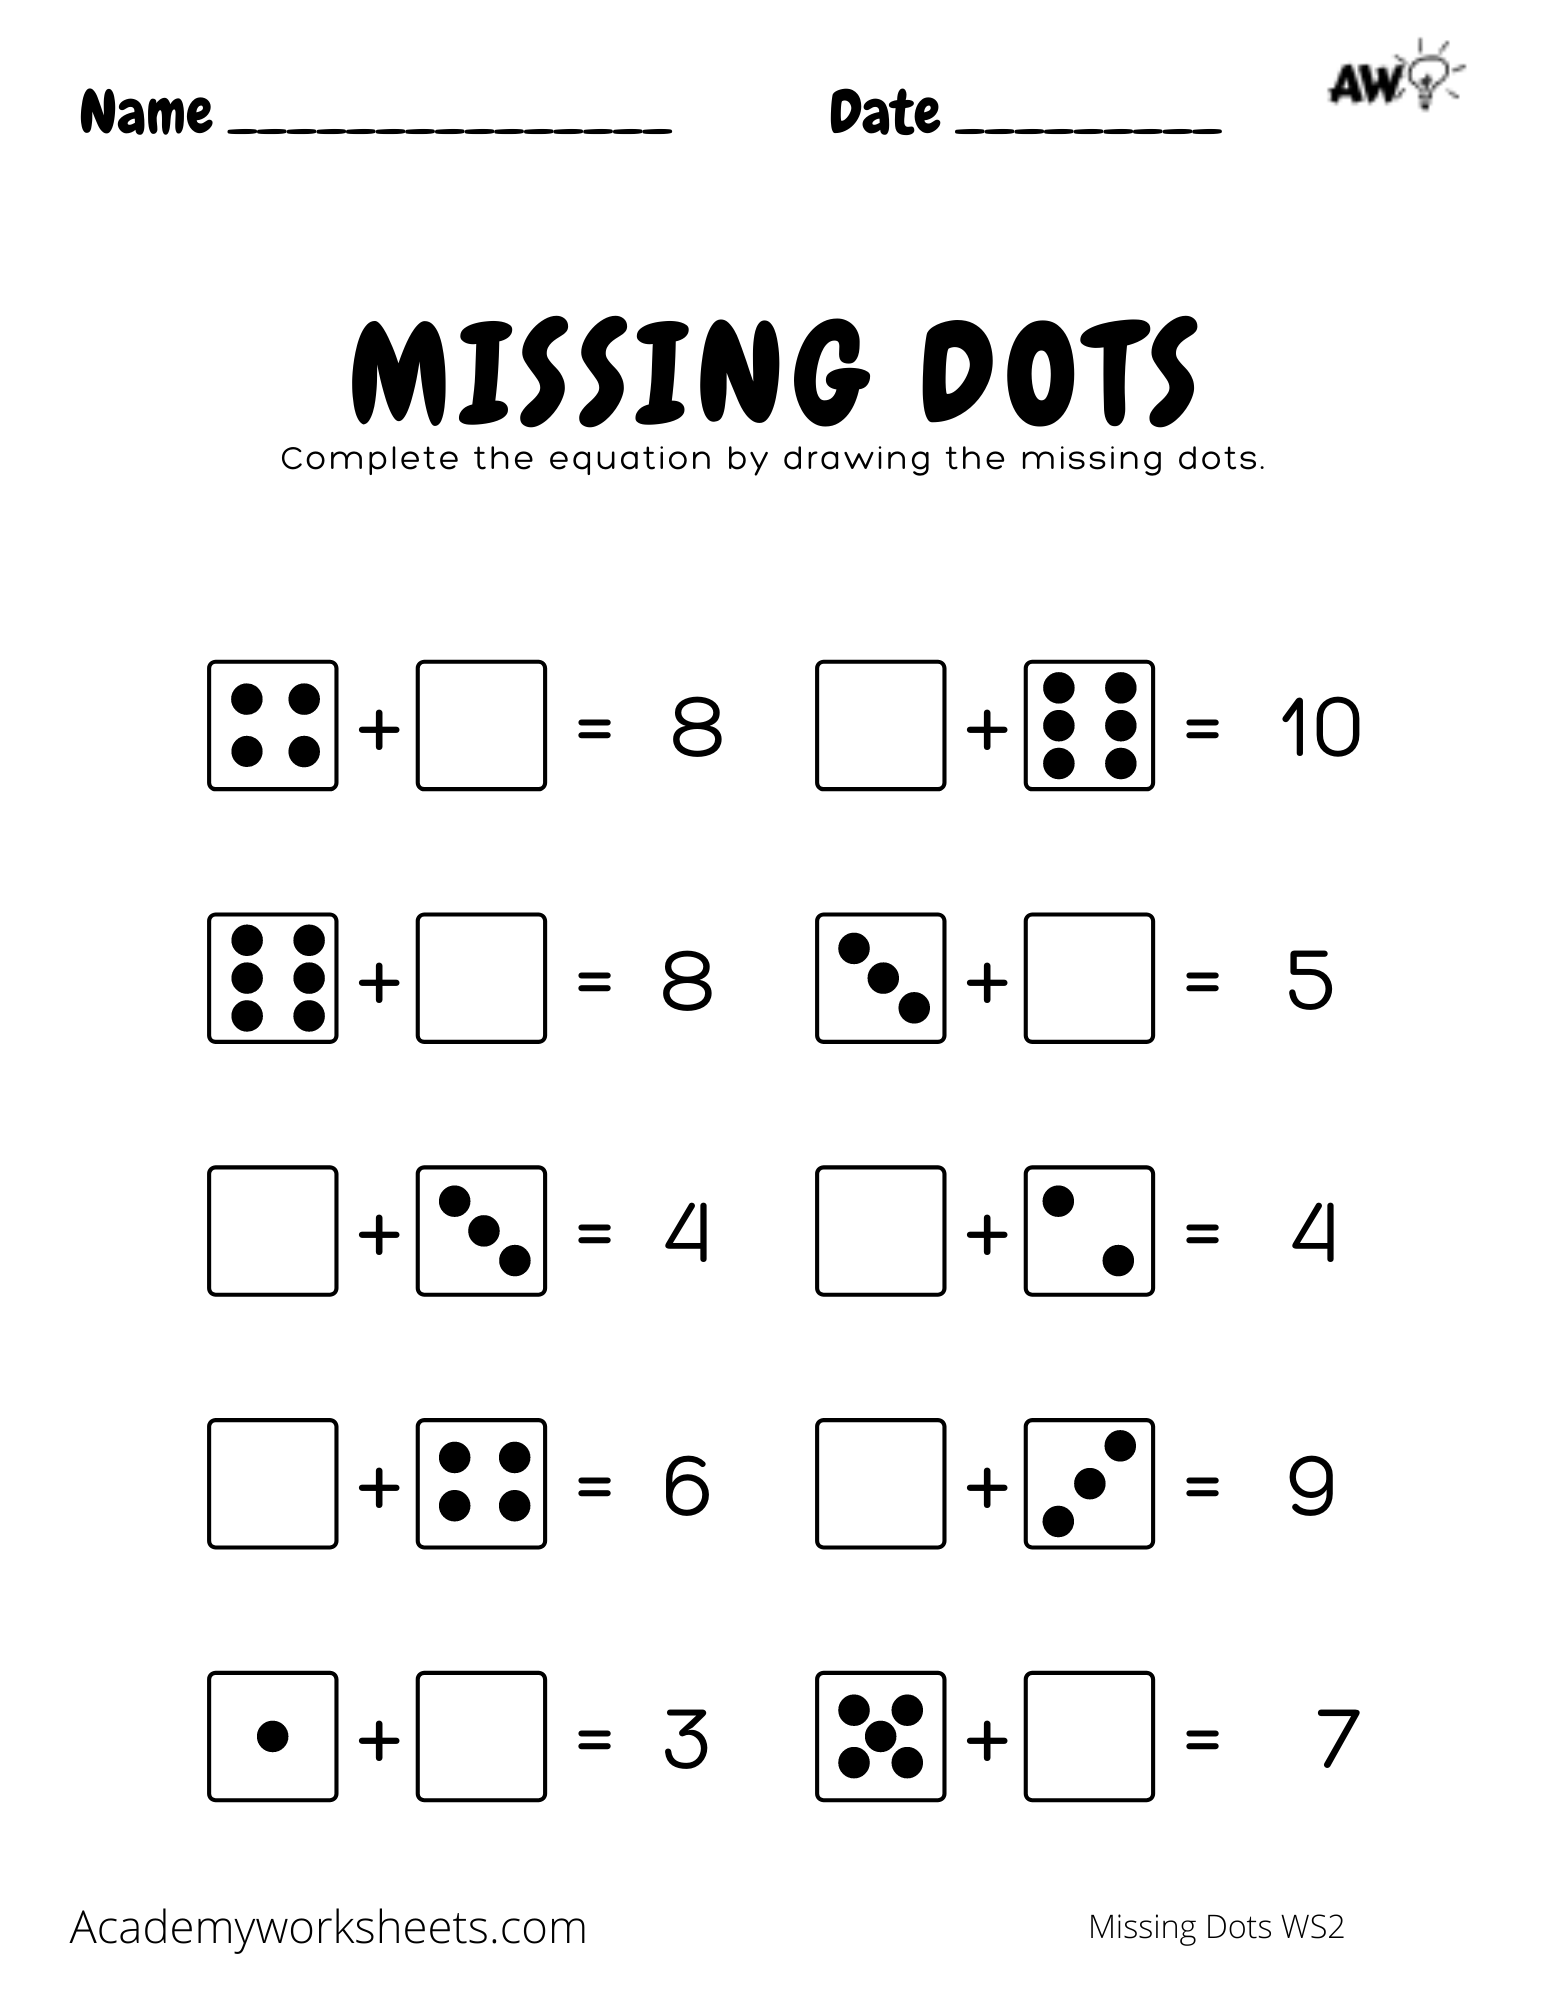 free-simple-math-worksheets-as-well-as-a-doubles-math-sheet-and-a-more-challenging-doubles